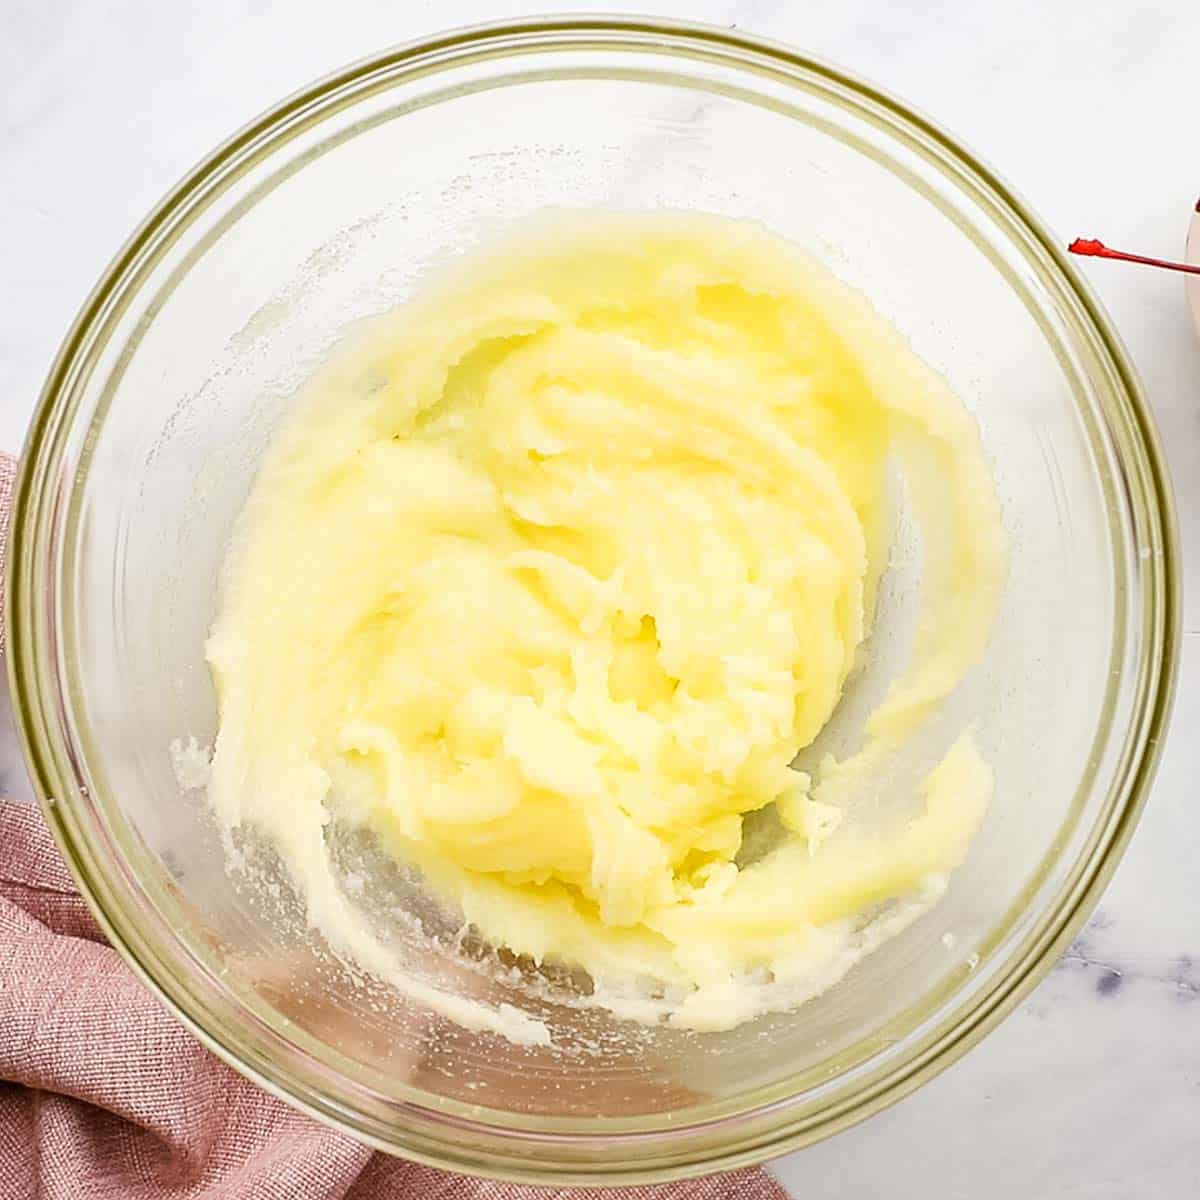 sugar, cream cheese, and melted butter whisked together in a bowl